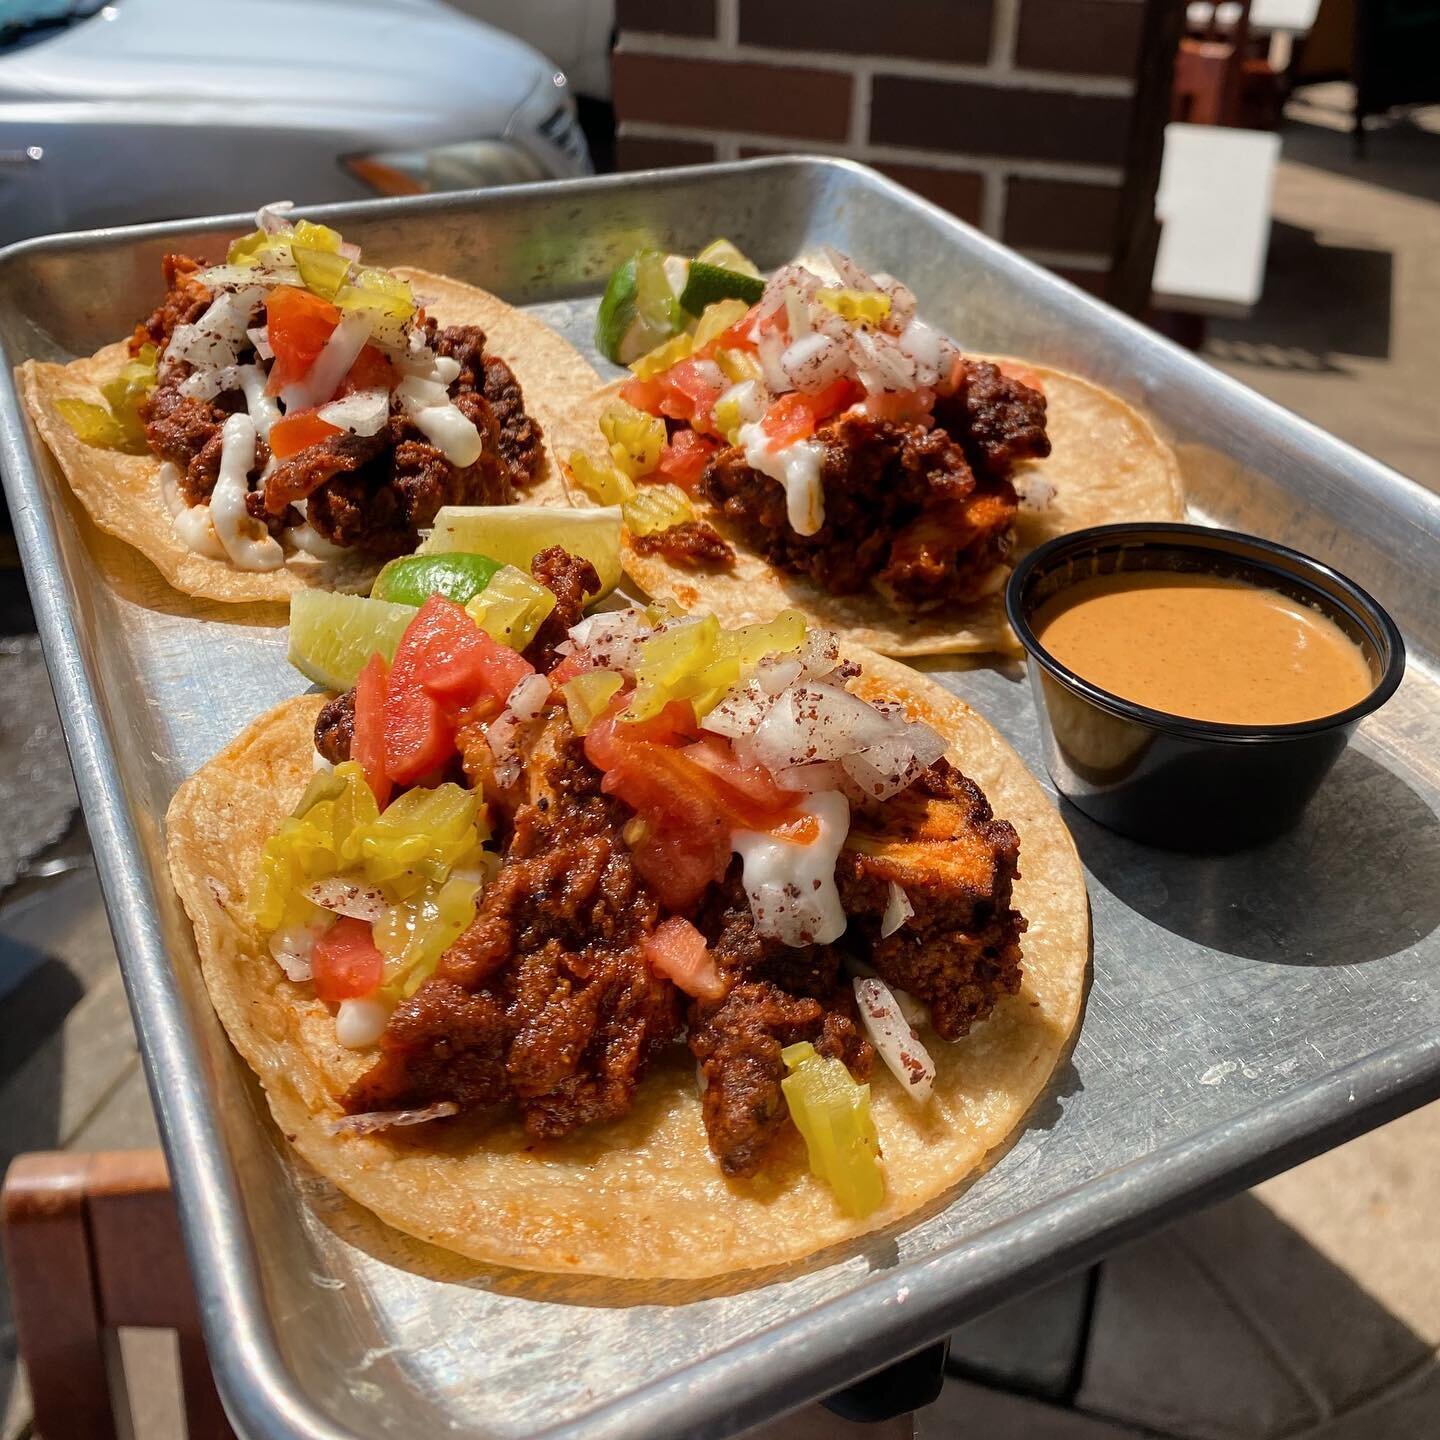 It&rsquo;s Taco TUUEEEESDAY 💥⚡️💥

Tag us @eatcedars on Instagram for a chance to win WEEK 3 TACOS on us! 🔥 

📸: &ldquo;Popeye&rsquo;s Ain&rsquo;t Sh!t&rdquo; Chicken Tacos 🔥

#eatcedars #freefood #chicagofoodmag #chicagofoodauthority #chicagofoo